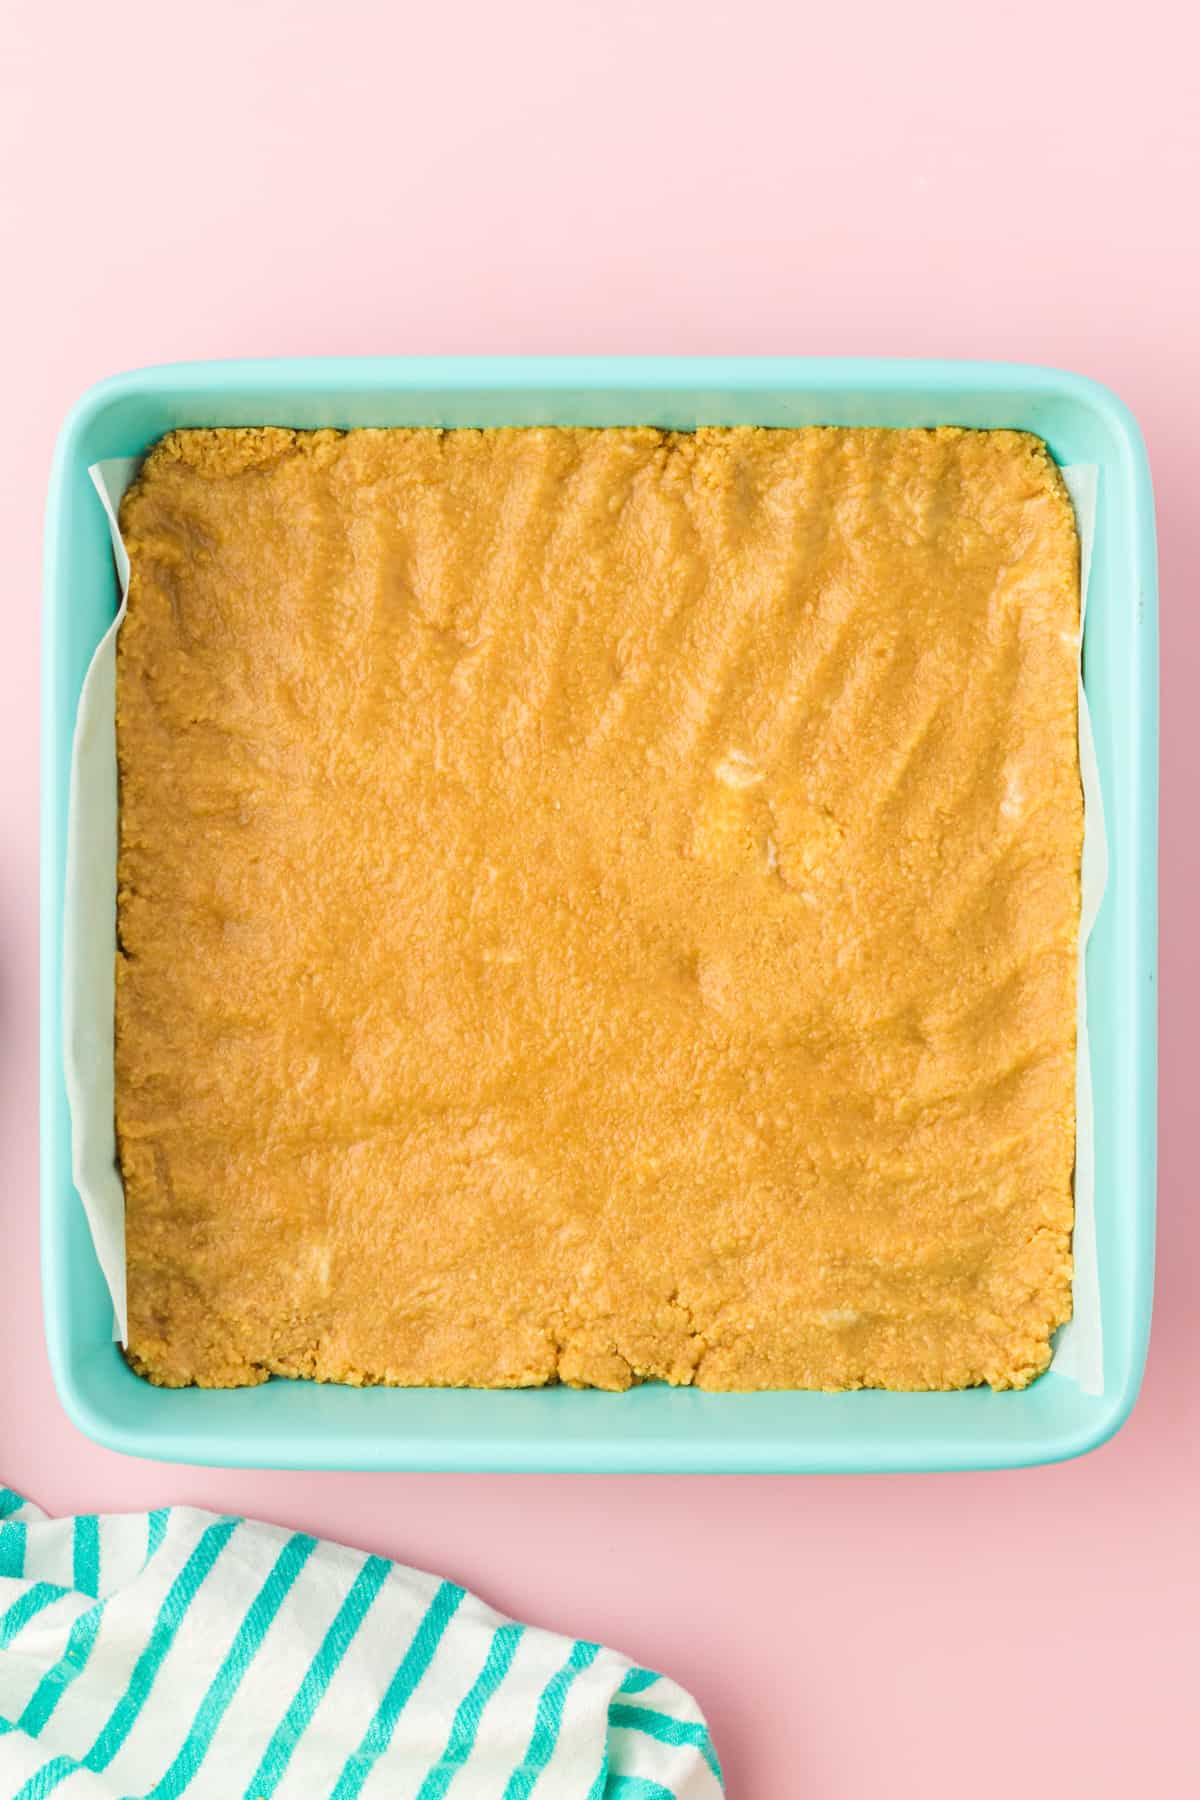 Golden oreo cookie crust pressed into light blue square baking pan.